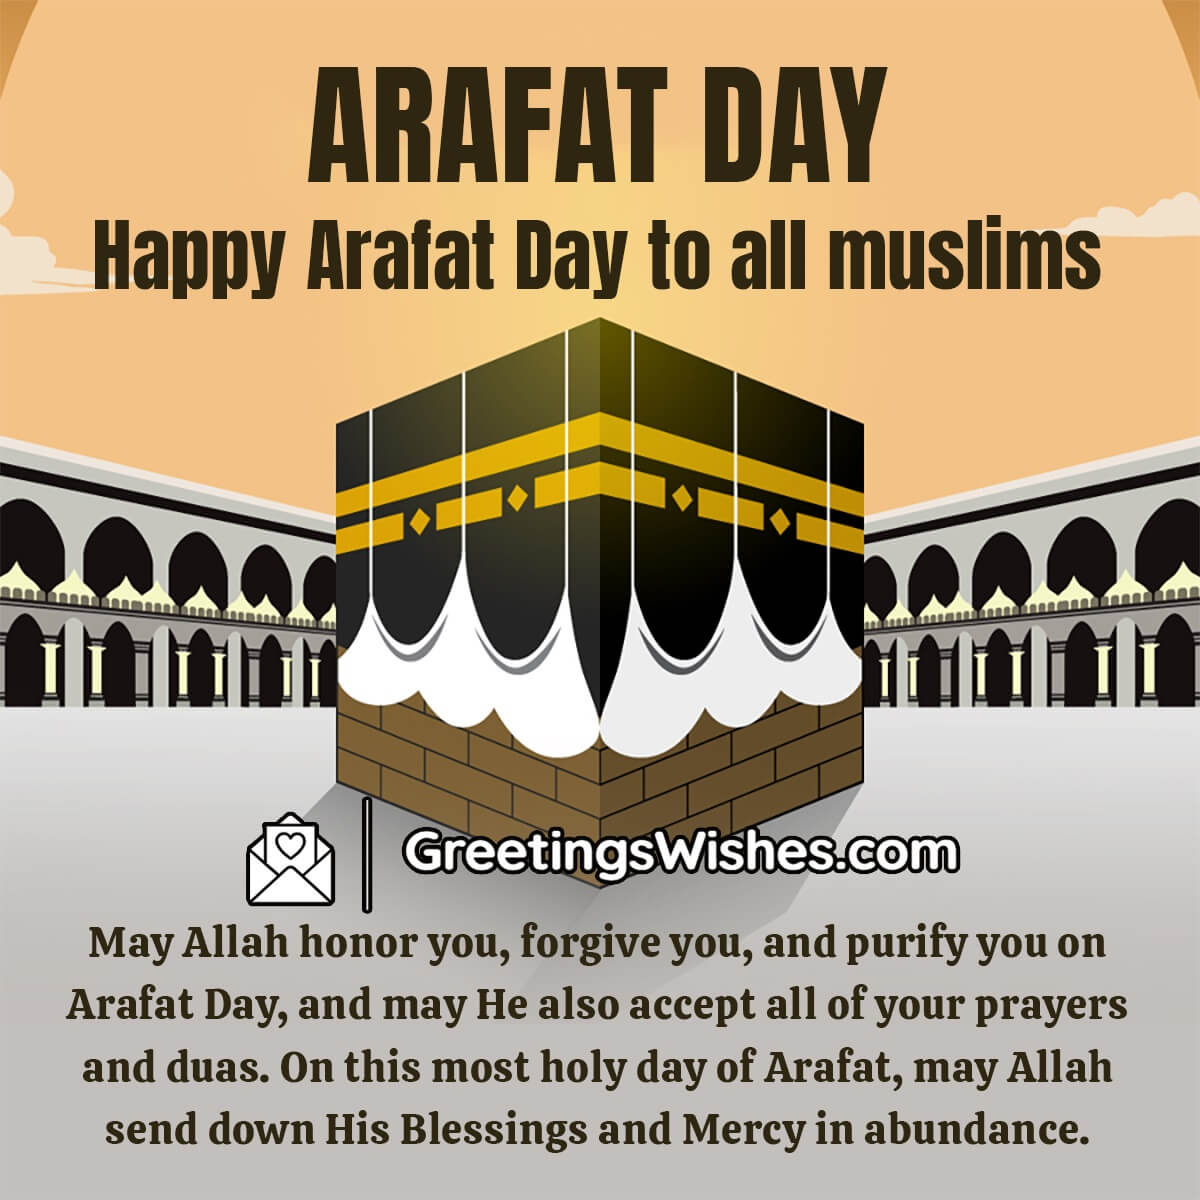 Happy Arafat Day To All Muslims